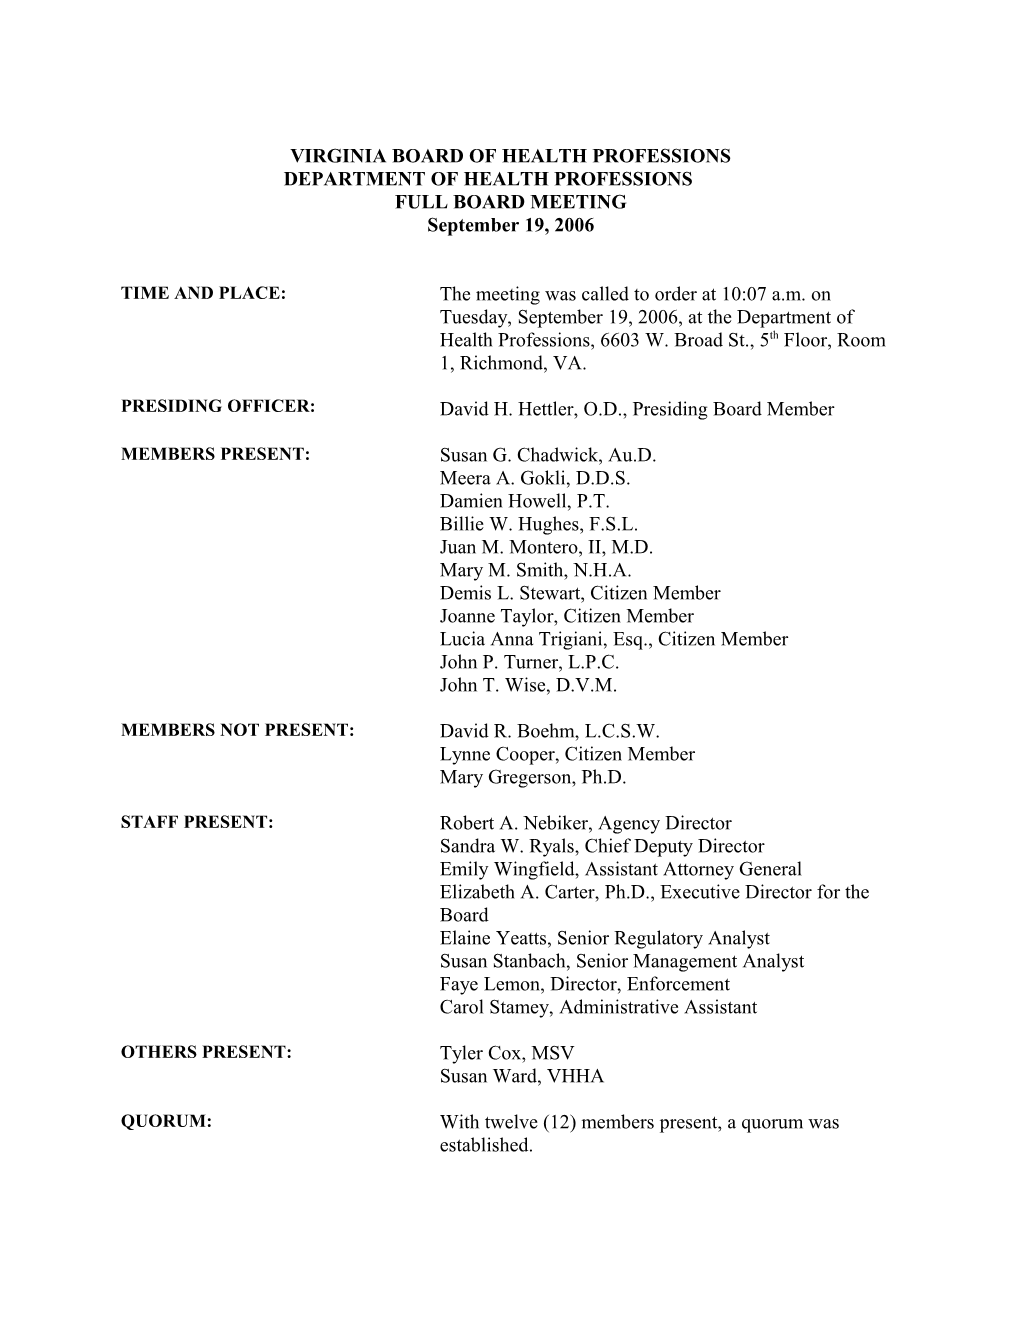 VIRGINIA BOARD of HEALTH PROFESSIONS 9-19-2006 Meeting Minutes